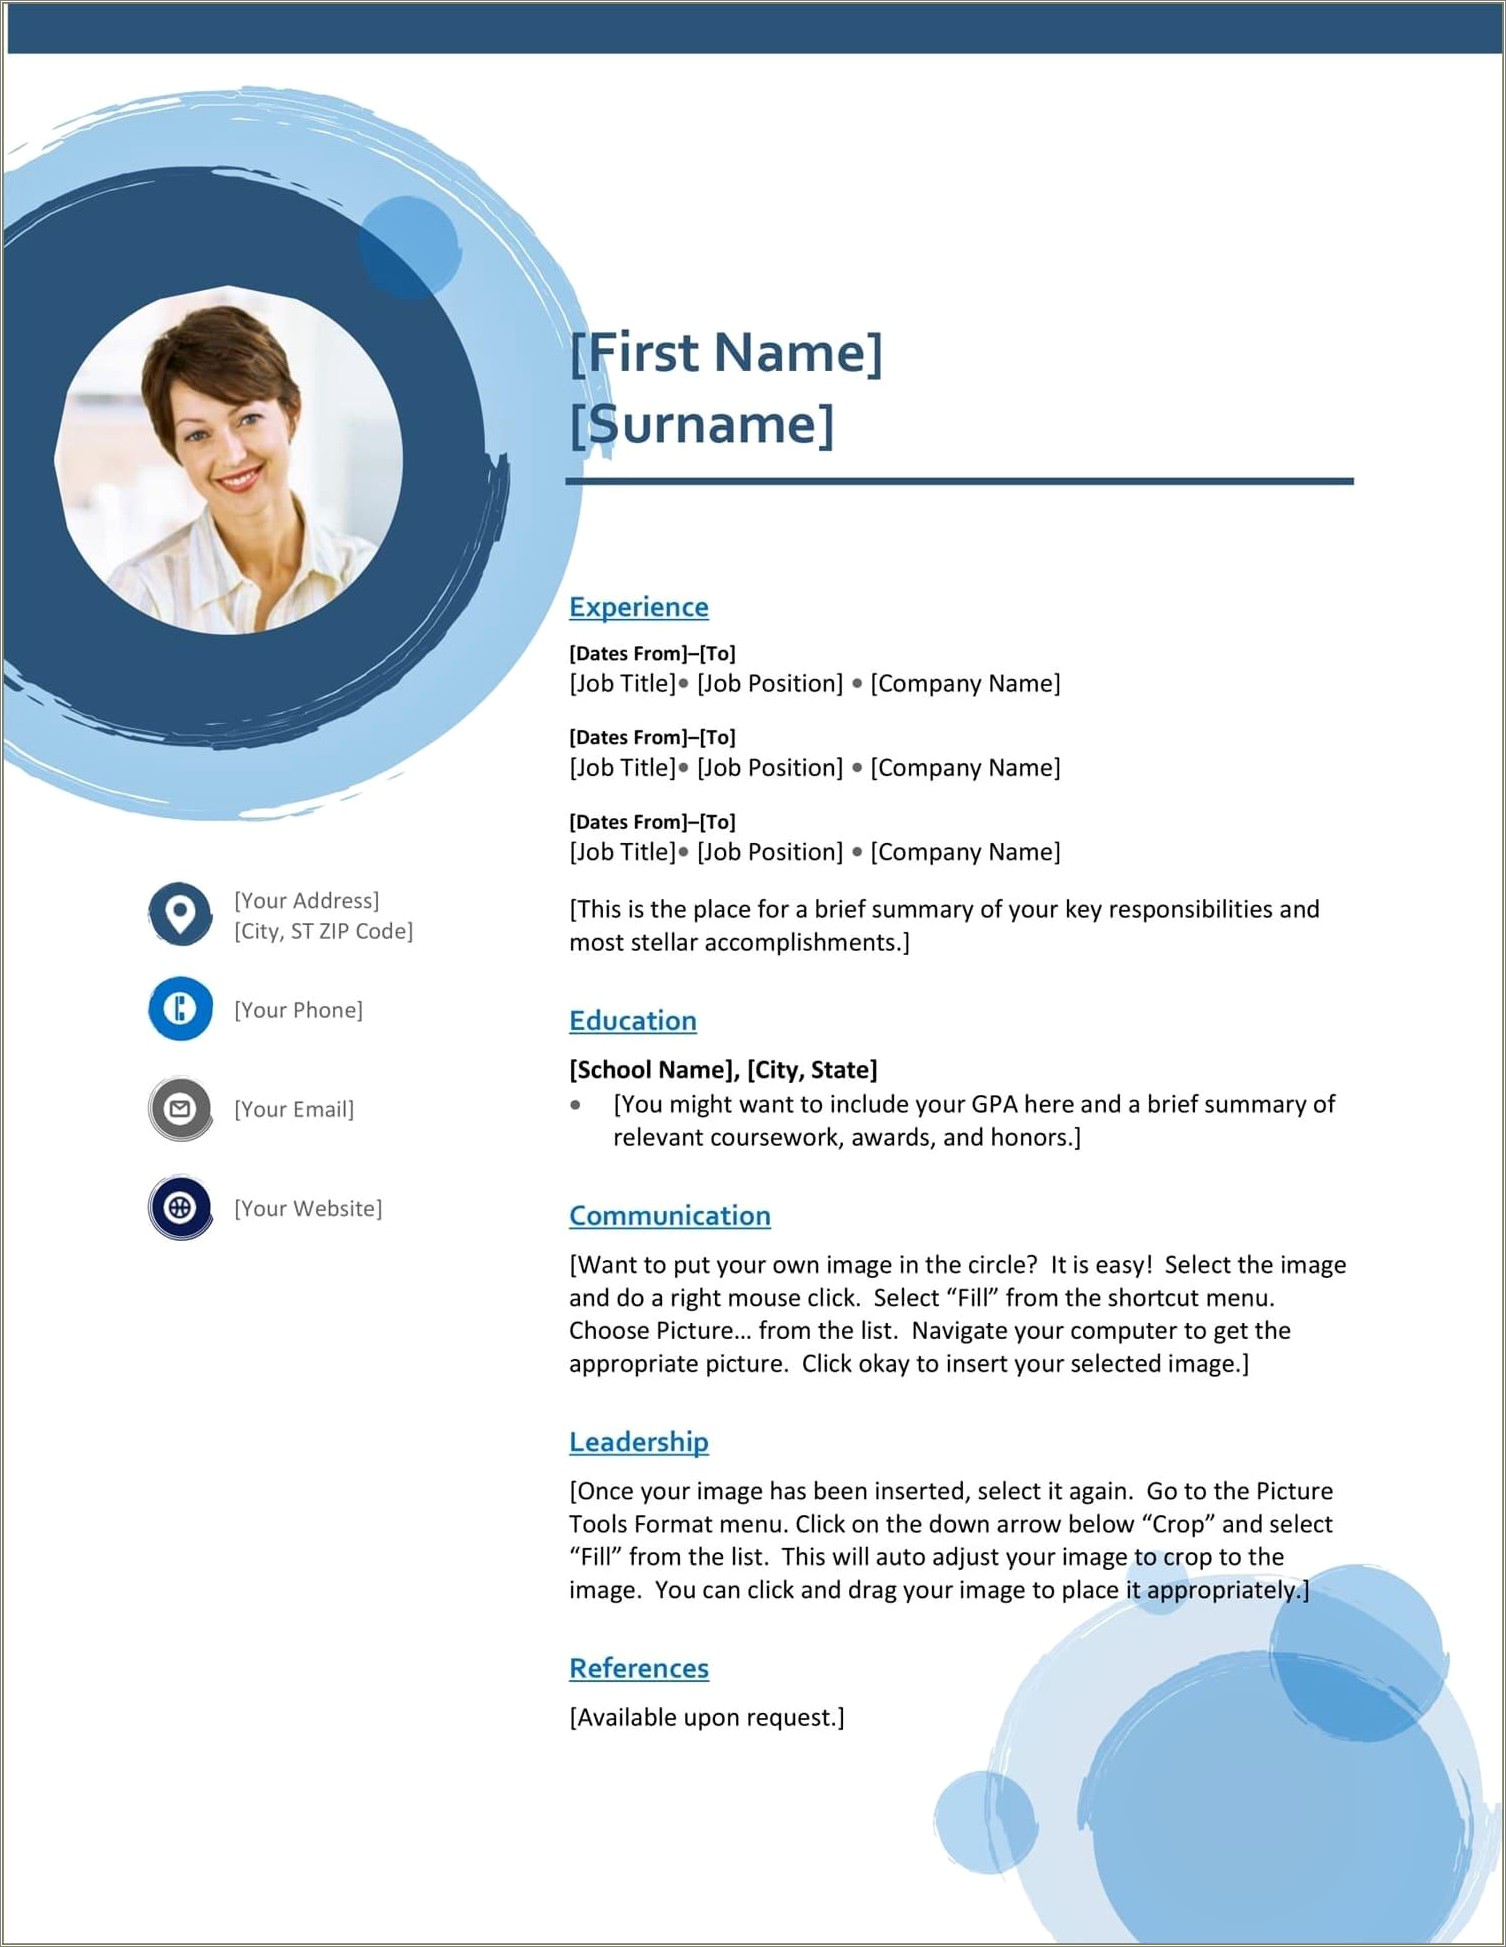 Create Your Own Resume For Free